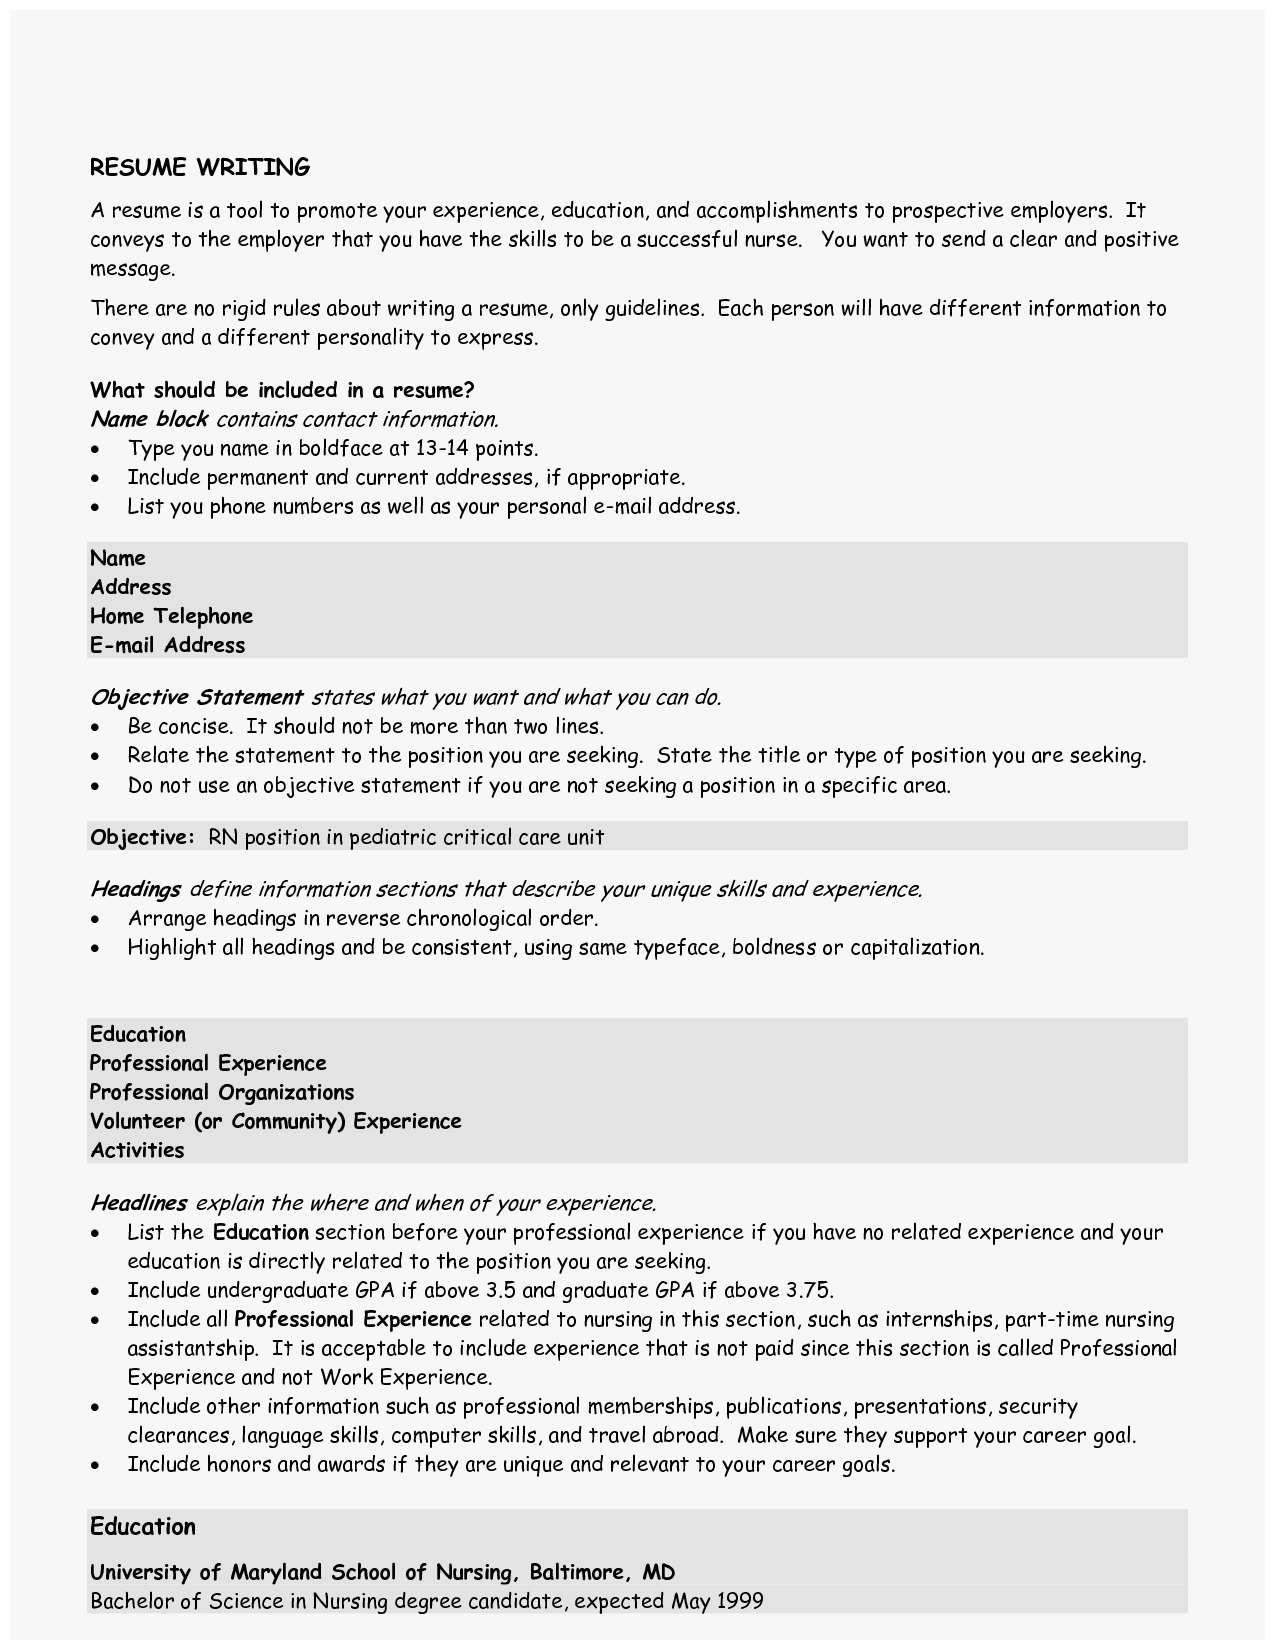 Good Objective For Resume Good Objective Statement For Resume Fresh Resume Objective Resume Cv Of Good Objective Statement For Resume good objective for resume|wikiresume.com